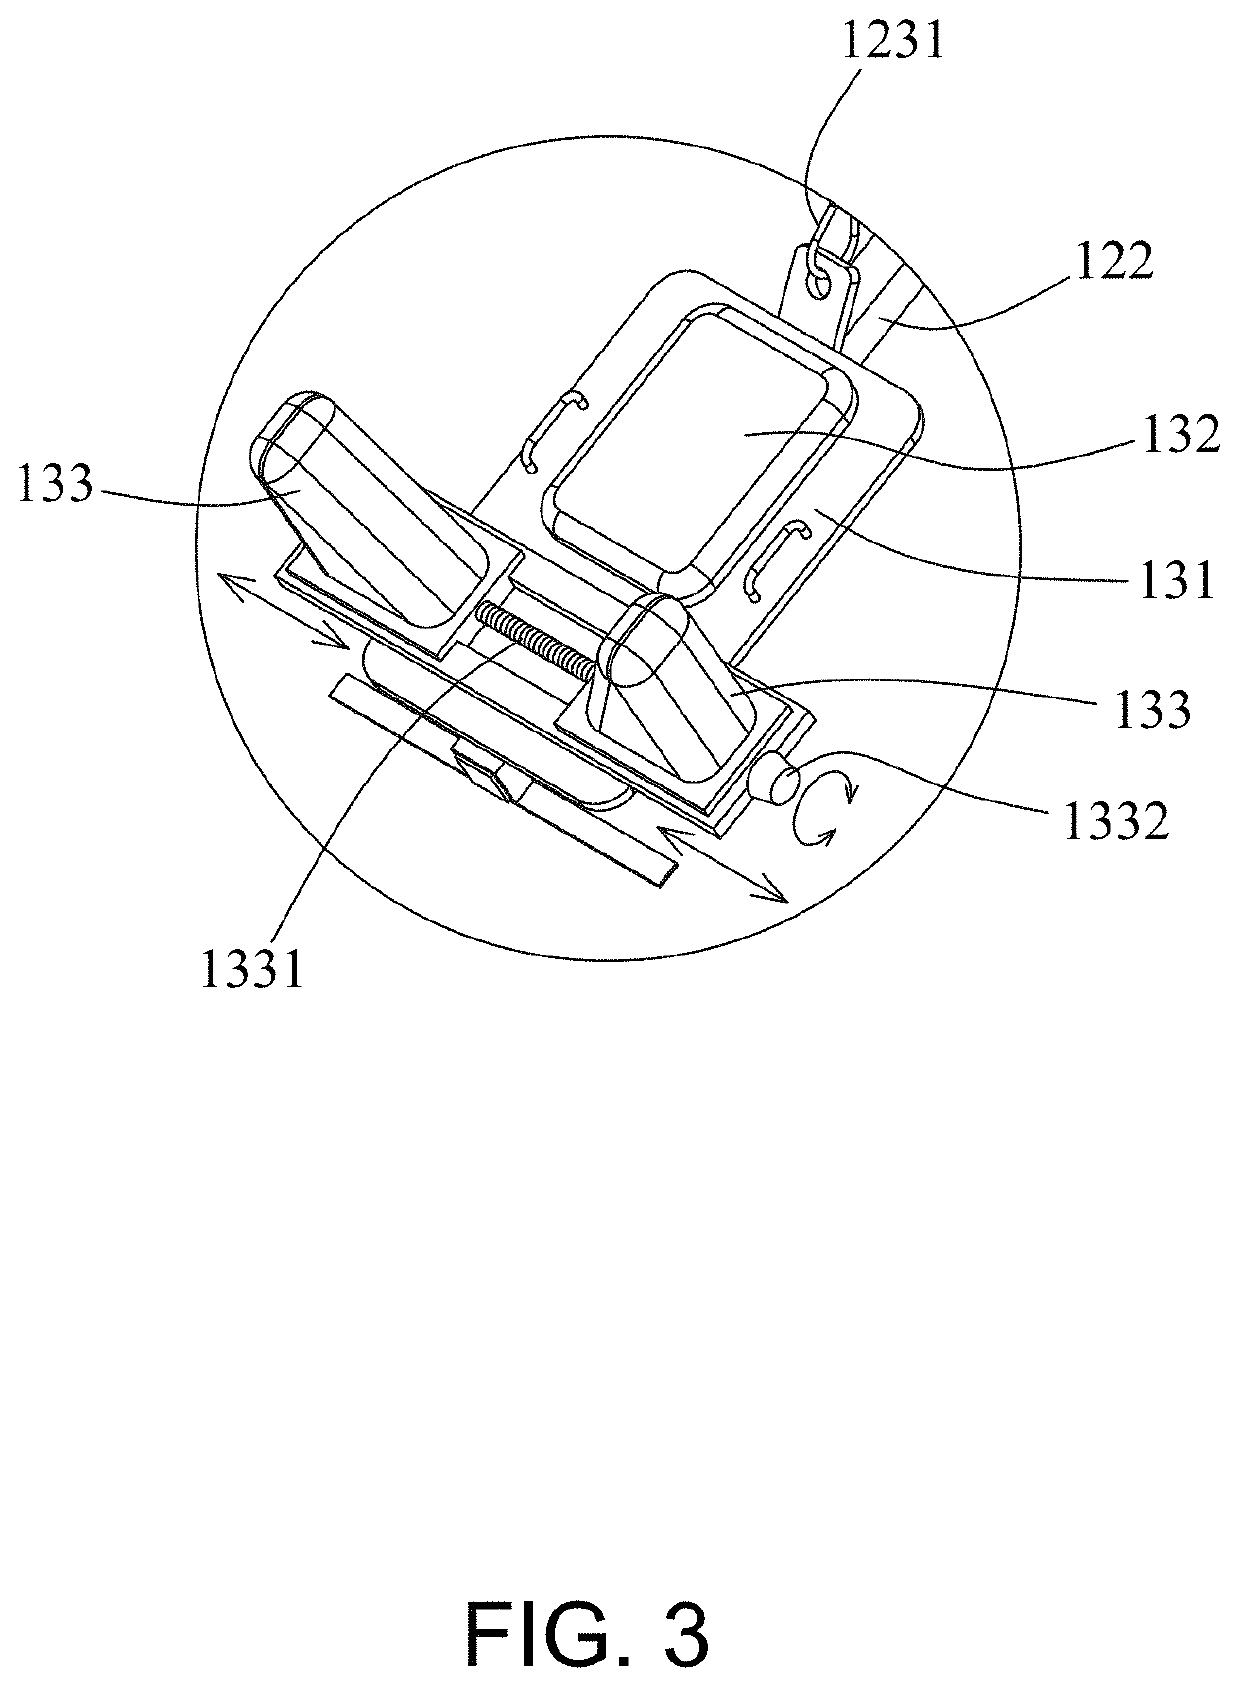 Cervical spine traction device, equipment and method